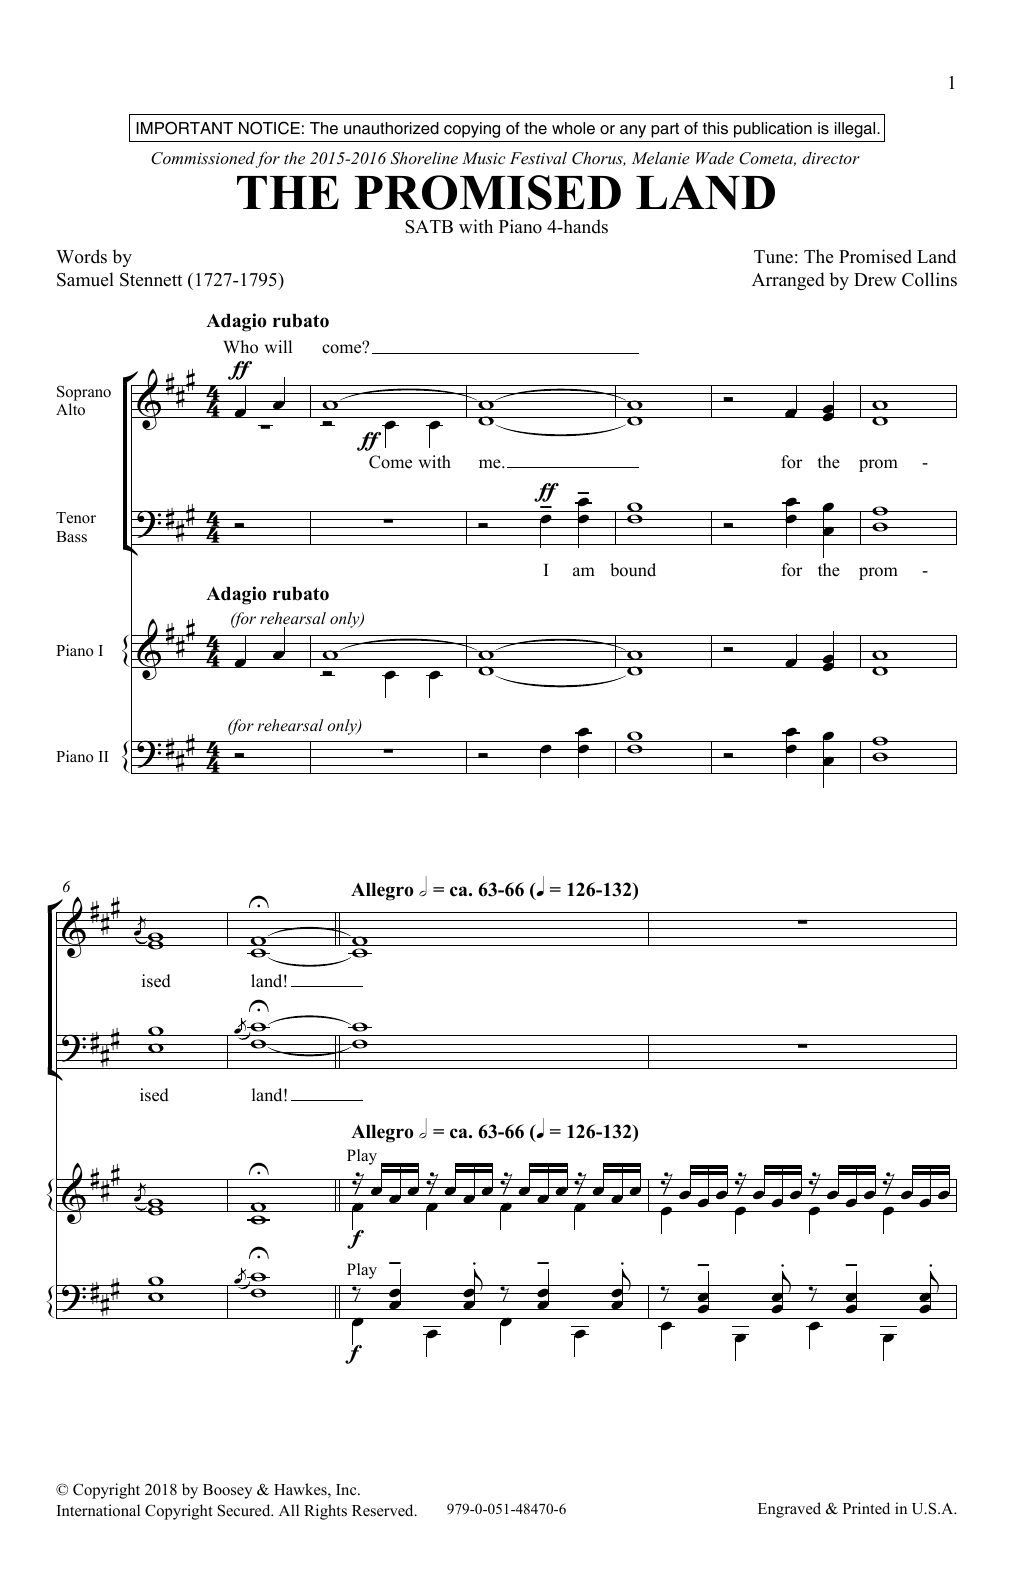 Download Drew Collins The Promised Land Sheet Music